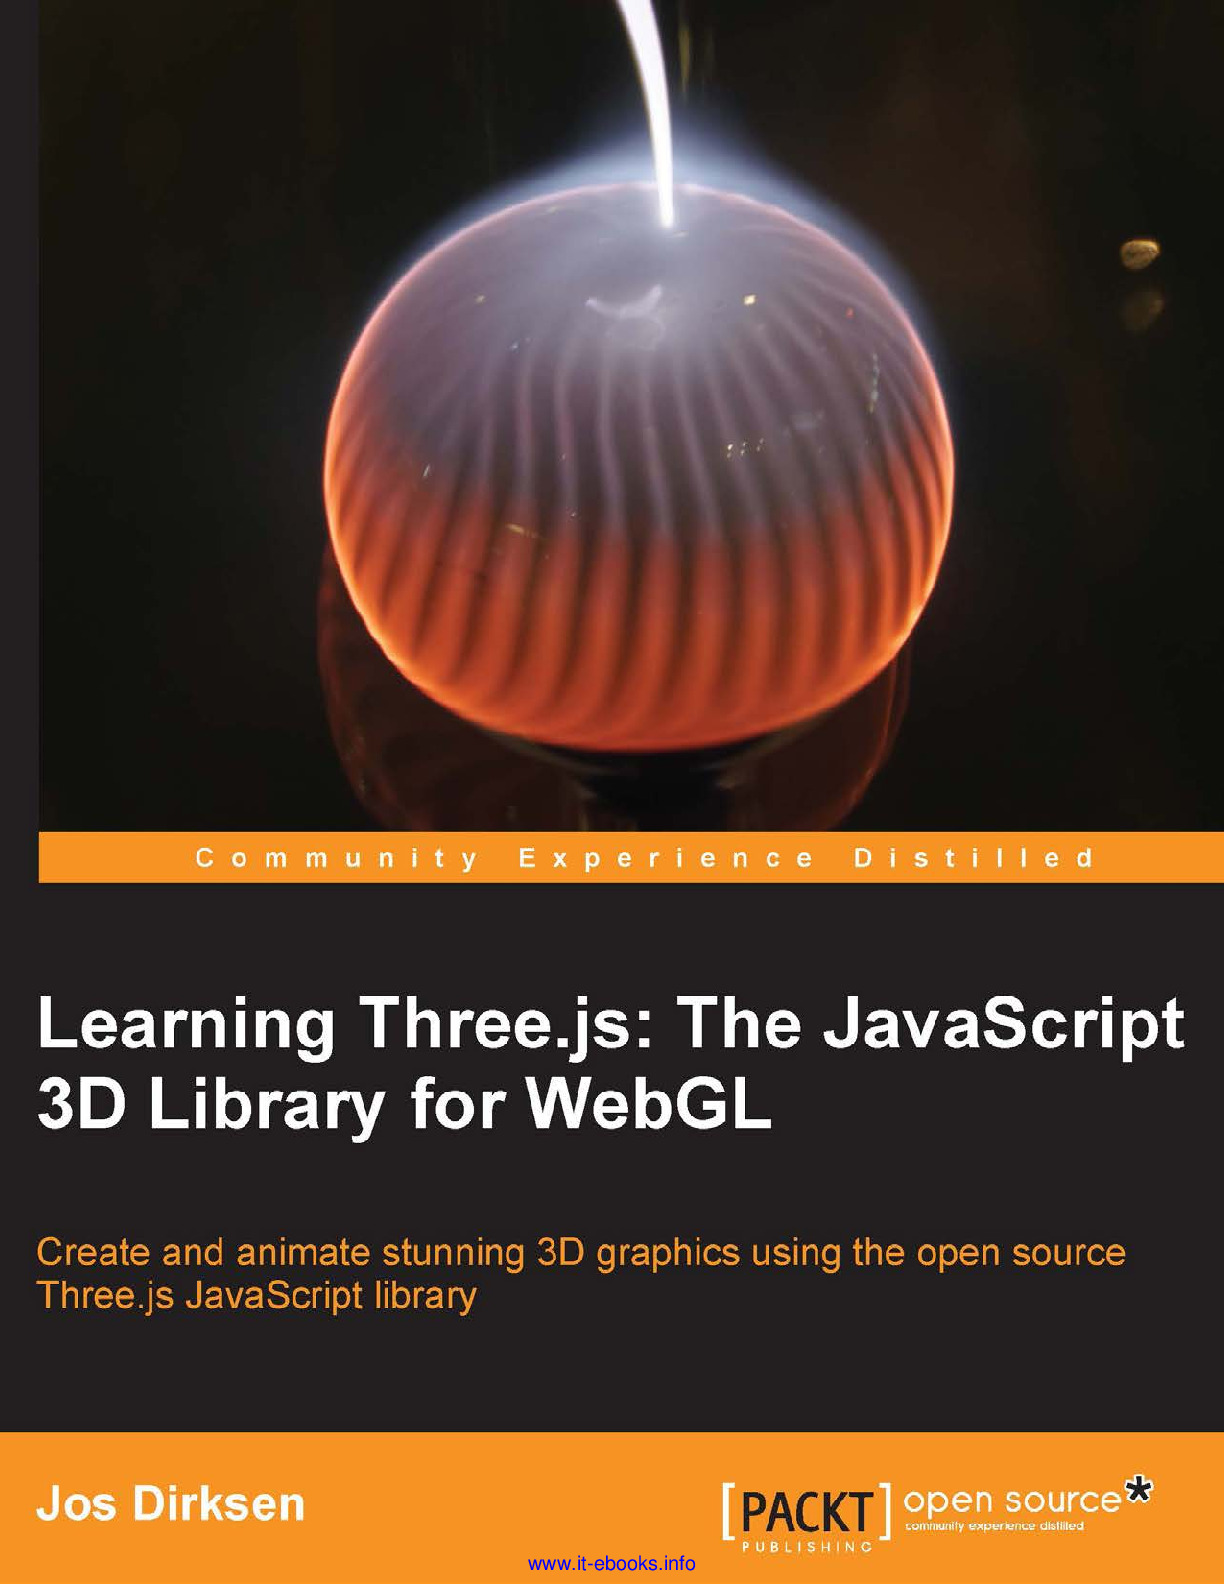 Learning Three.js- The JavaScript 3D Library for WebGL